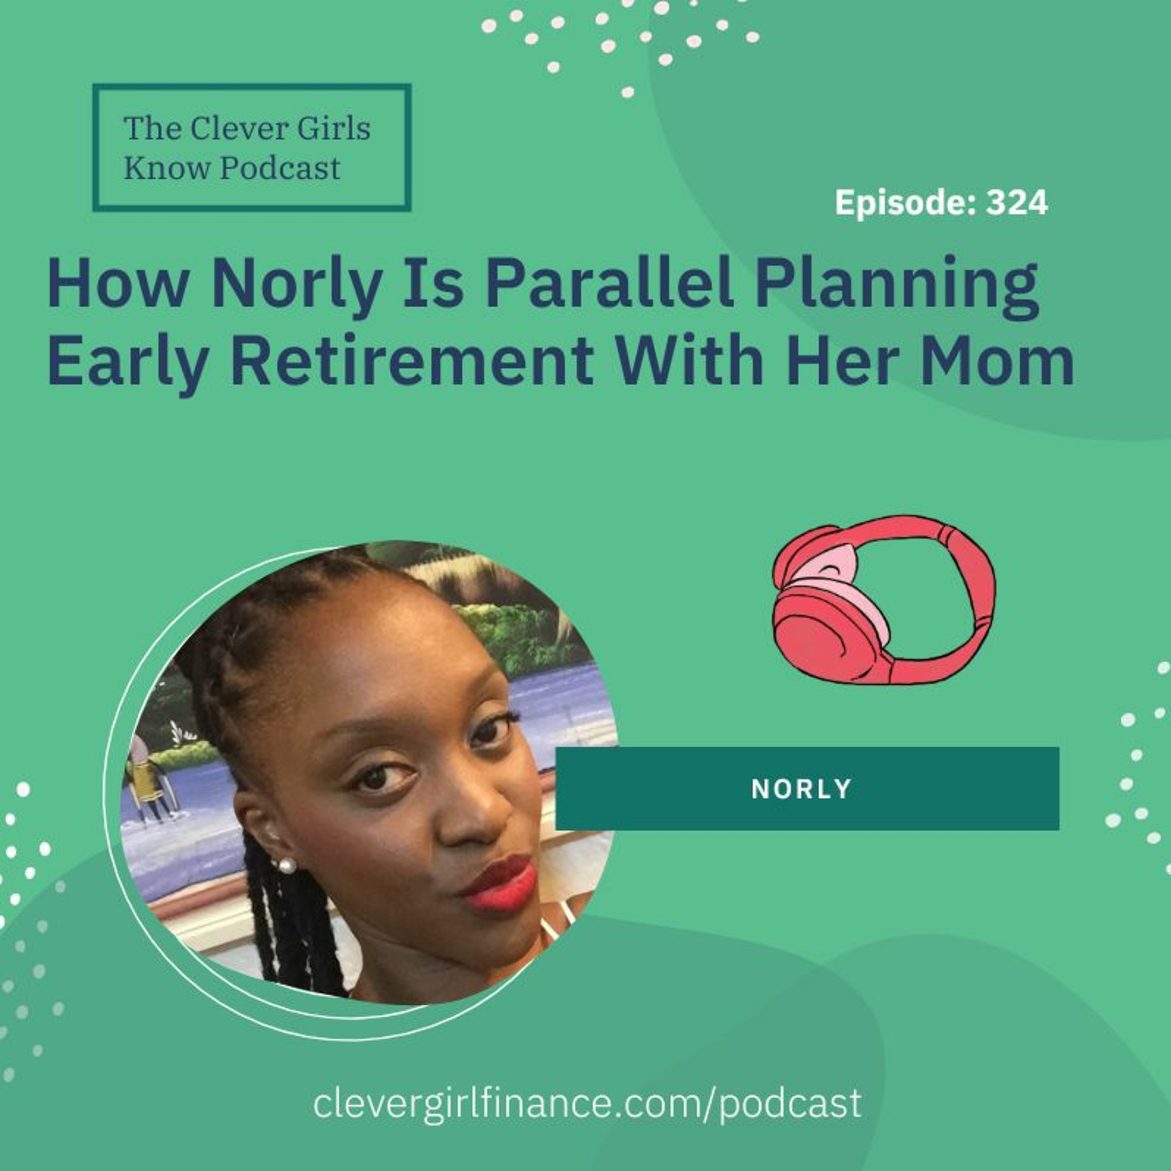 Black Podcasting - 324: How Norly Is Parallel Planning Her Early Retirement With Her Mom